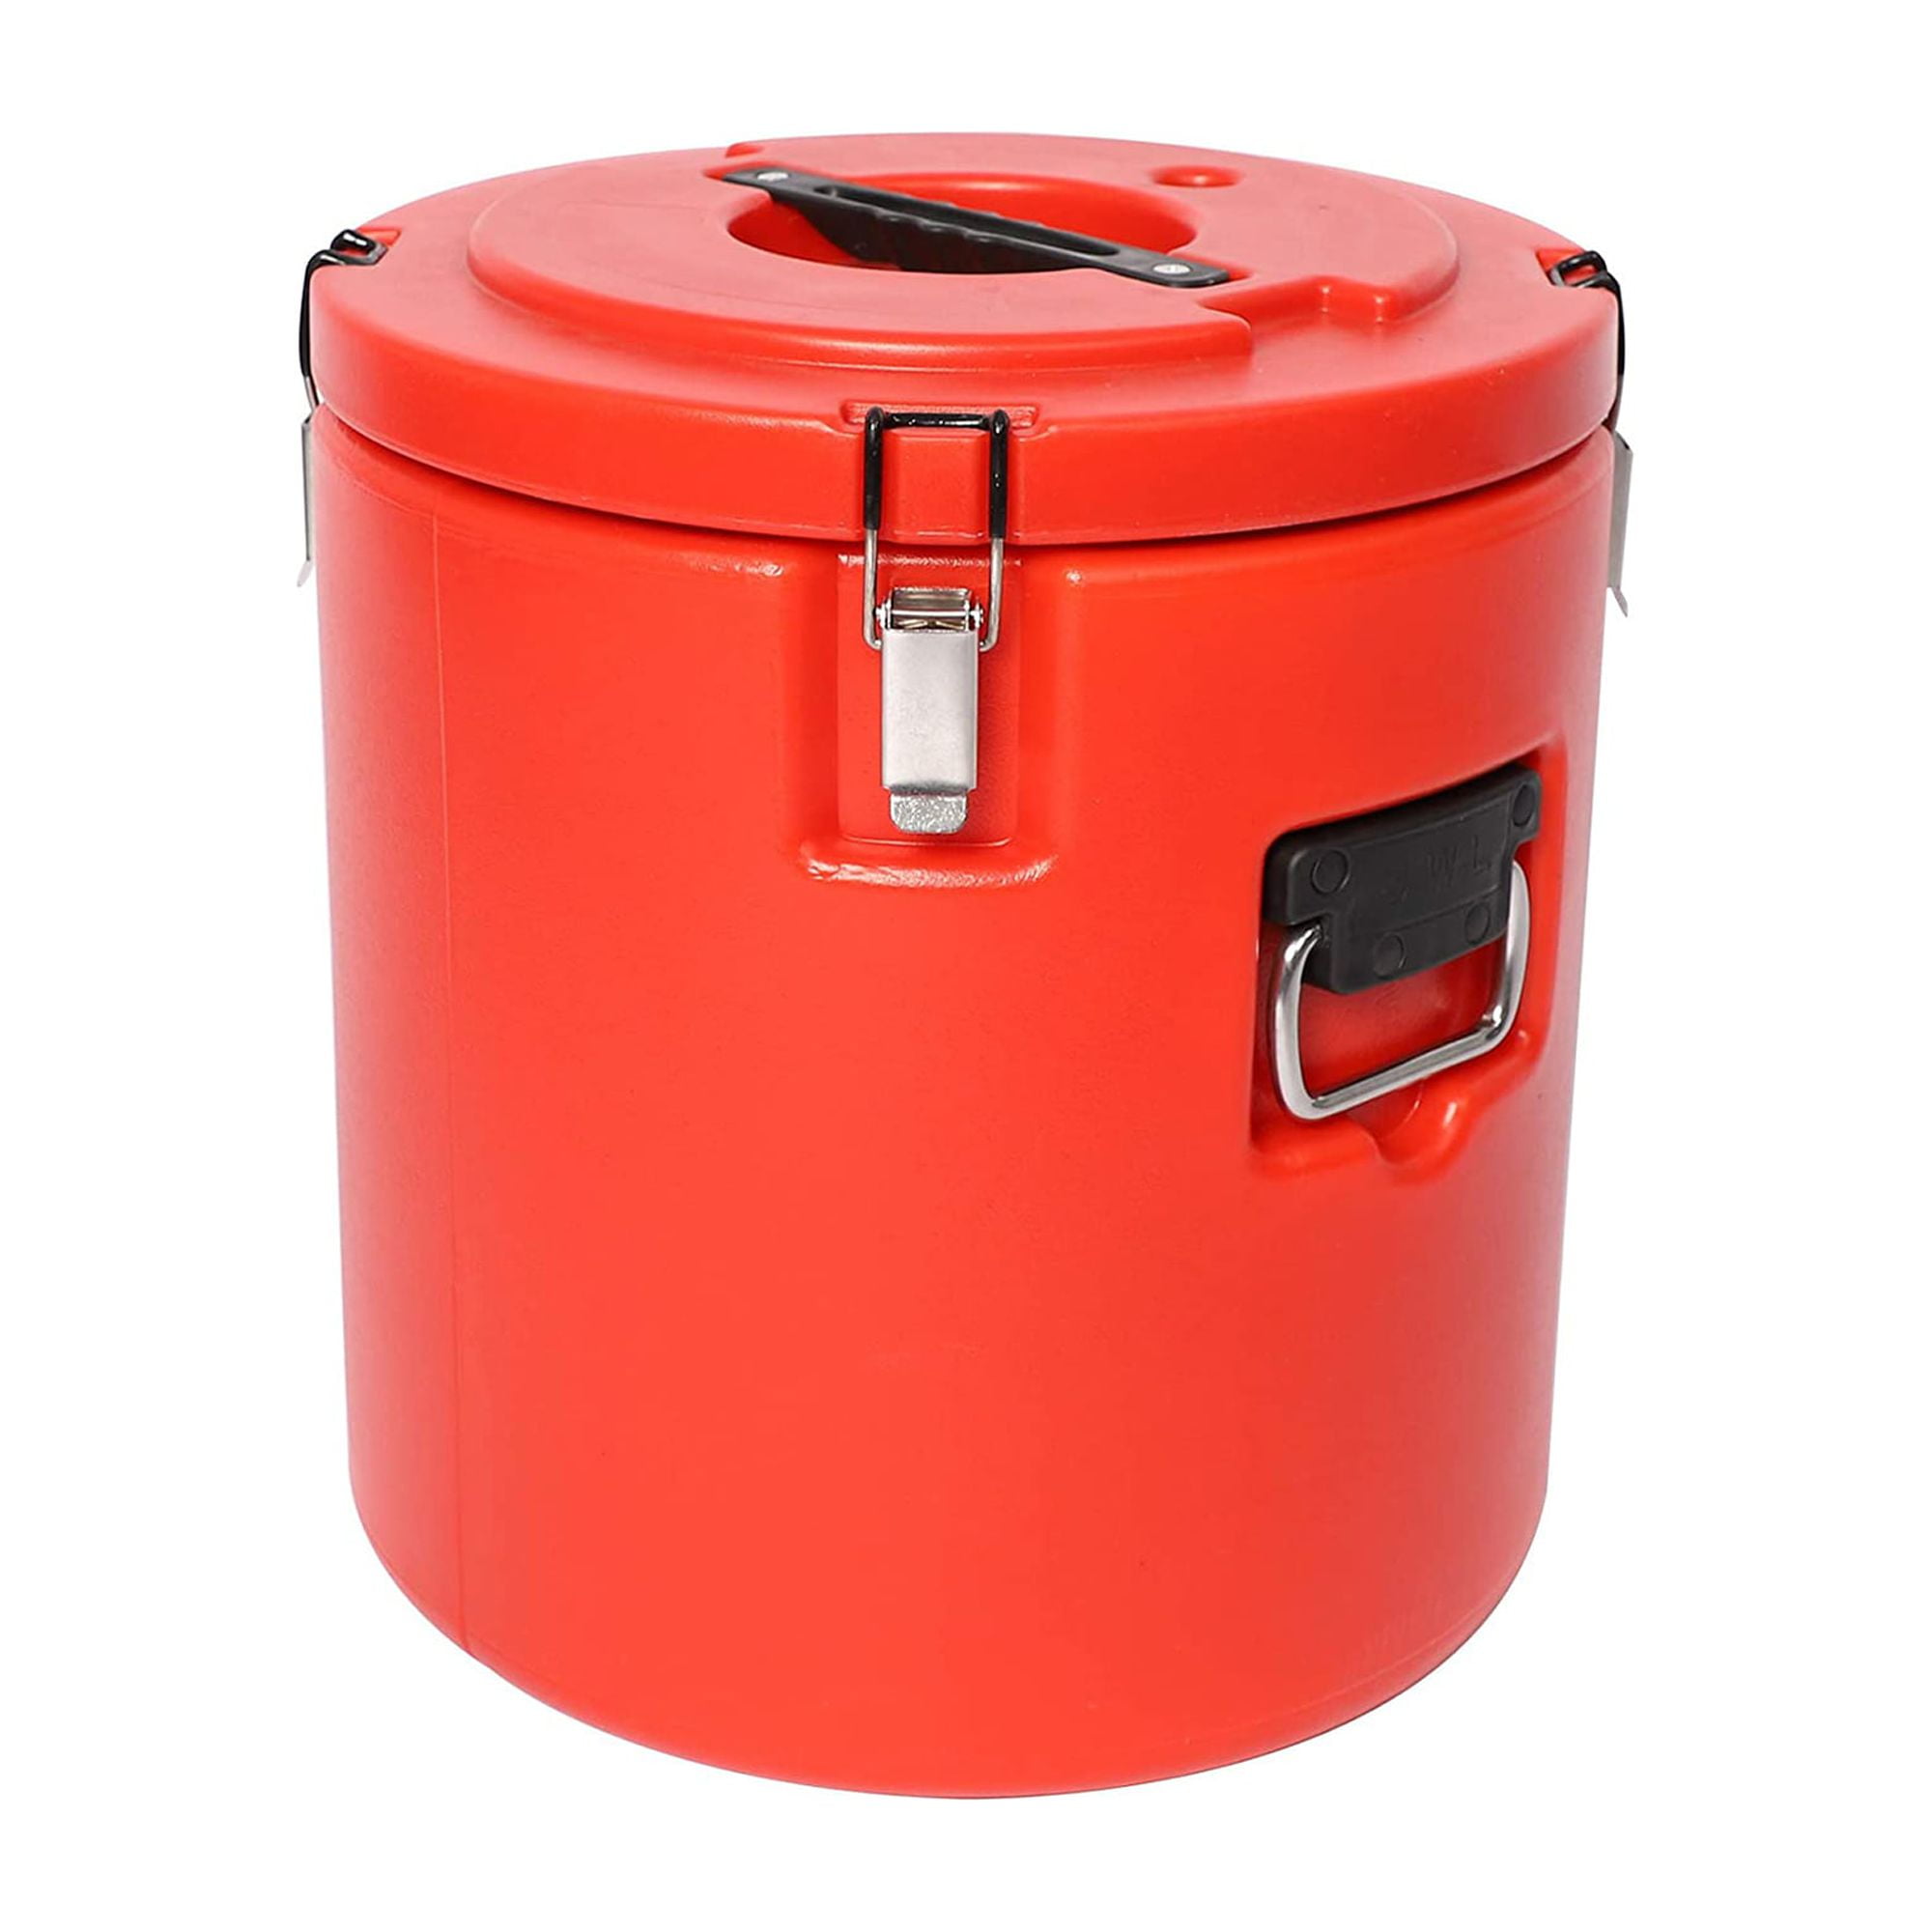 Insulated Beverage Container Orange - Rubbermaid Commercial